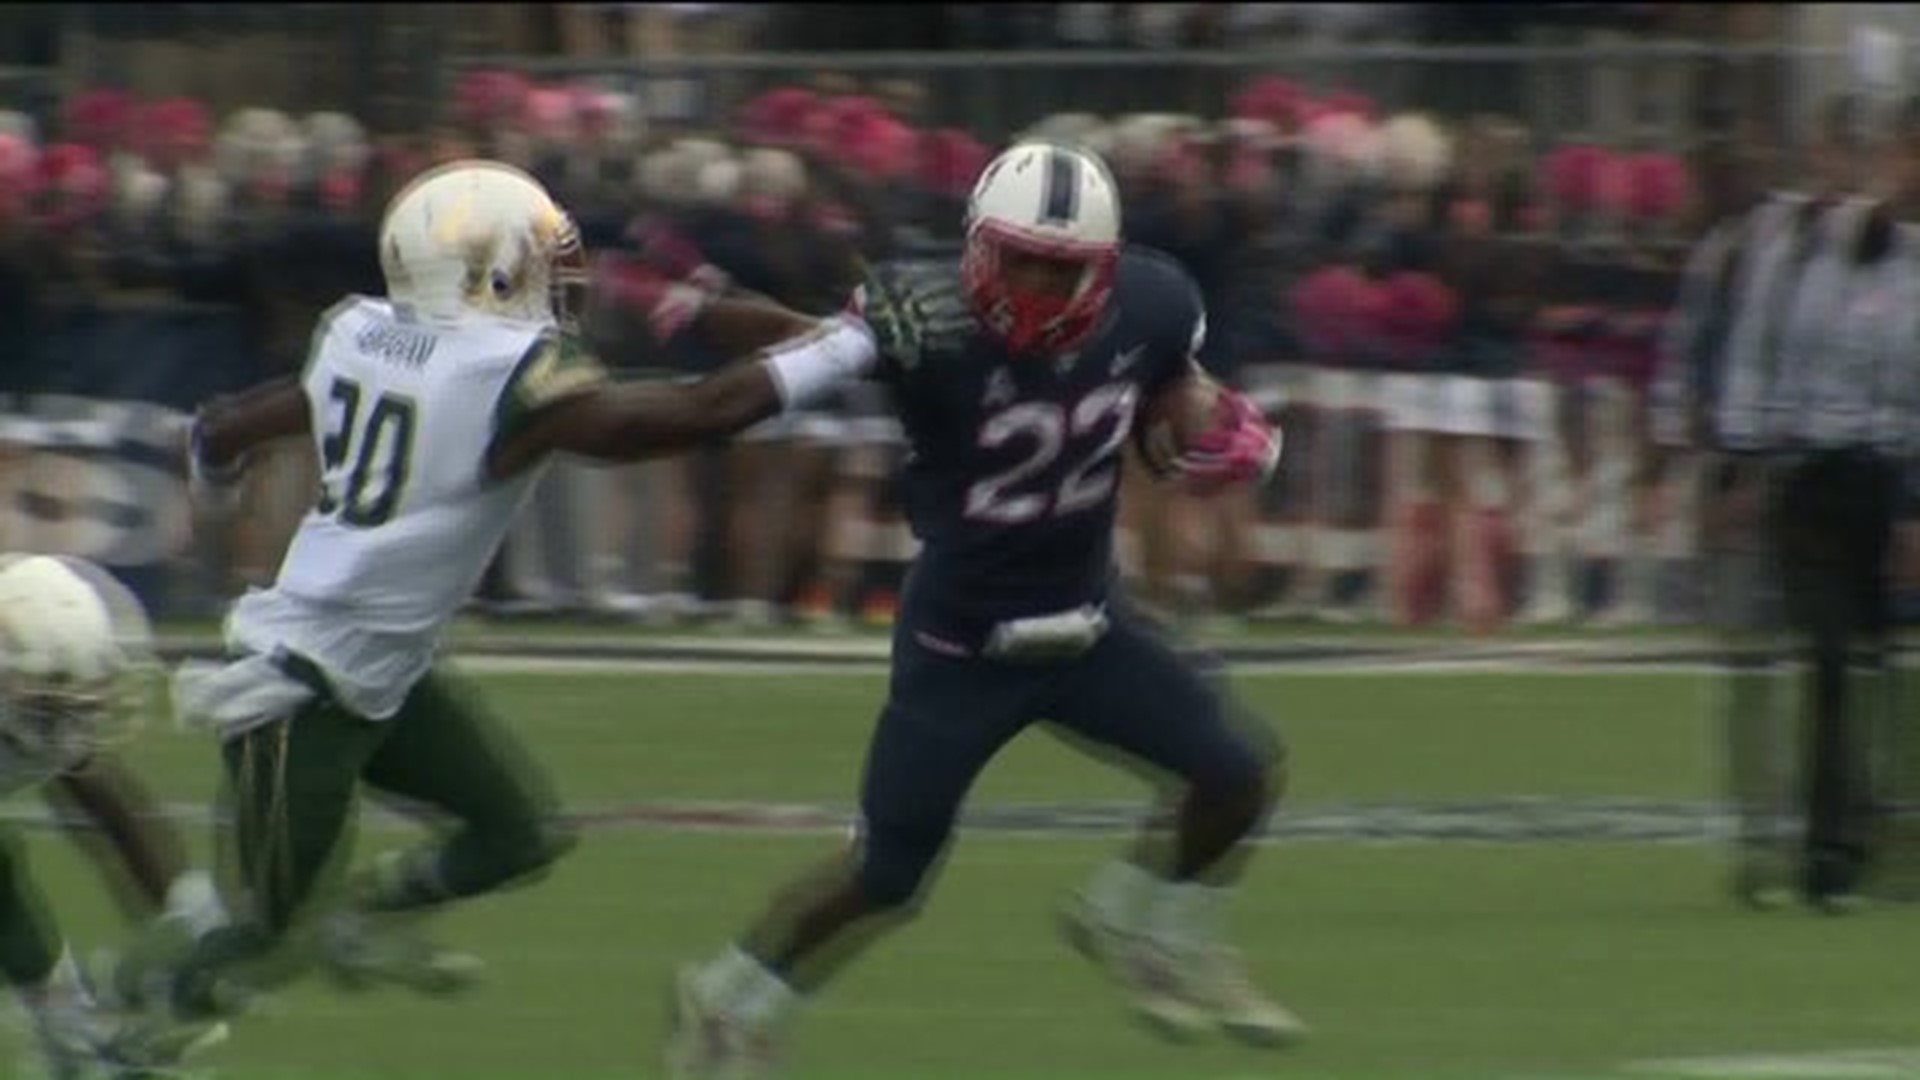 UConn loses 28-20 to USF